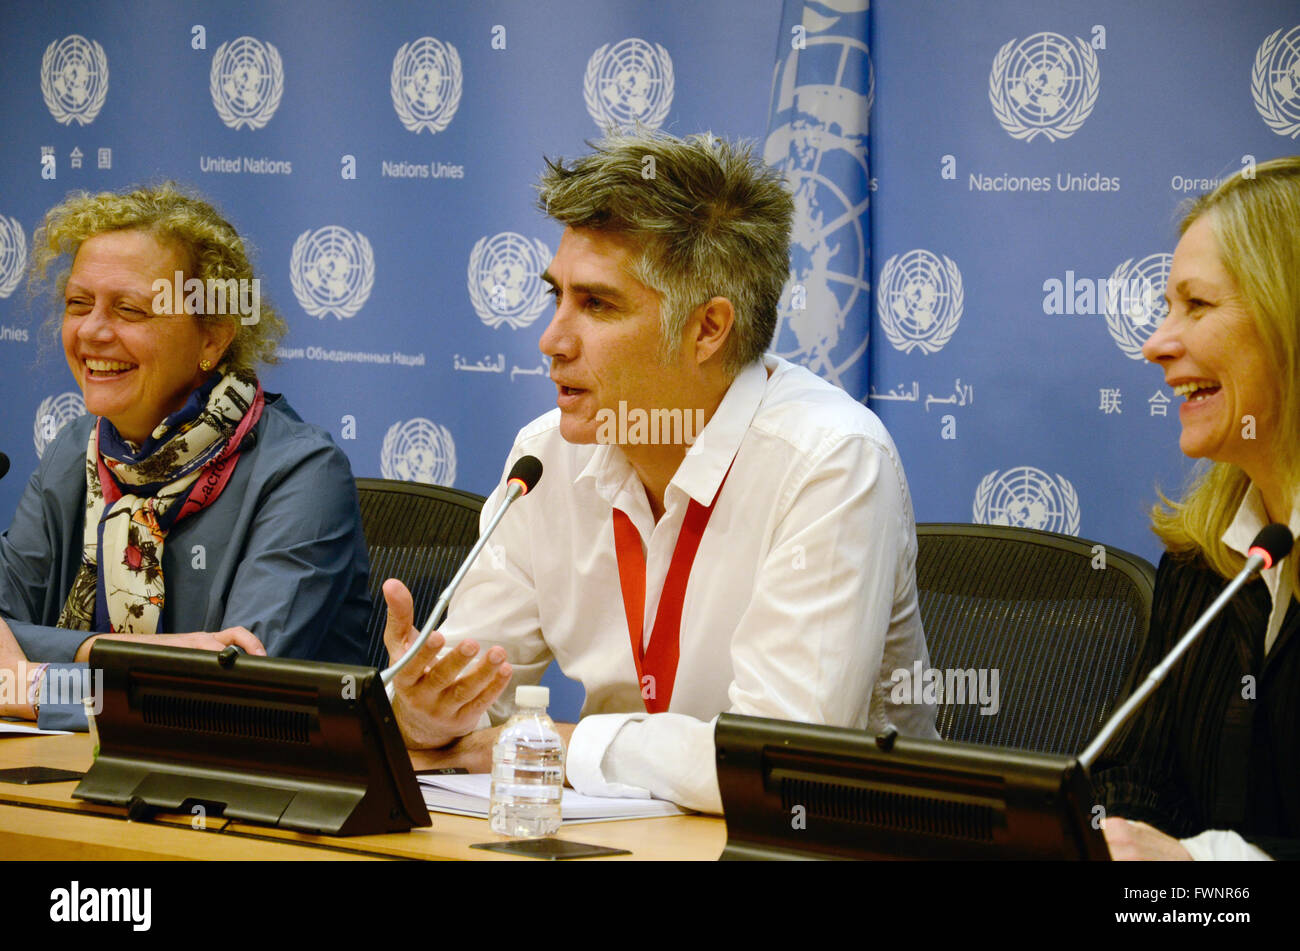 Alejandro Aravena, 2016 Pritzker Prize winner, talks during a press conference at the United Nations headquarters in New York 05 April 2016. He is accompanied by Paloma Durán (l), Director of the Sustainable Development Goals Fund, and Martha Thorne (right), Executive Director of The Pritzker Architecture Prize. Photo: Emoke Bebiak/dpa Stock Photo